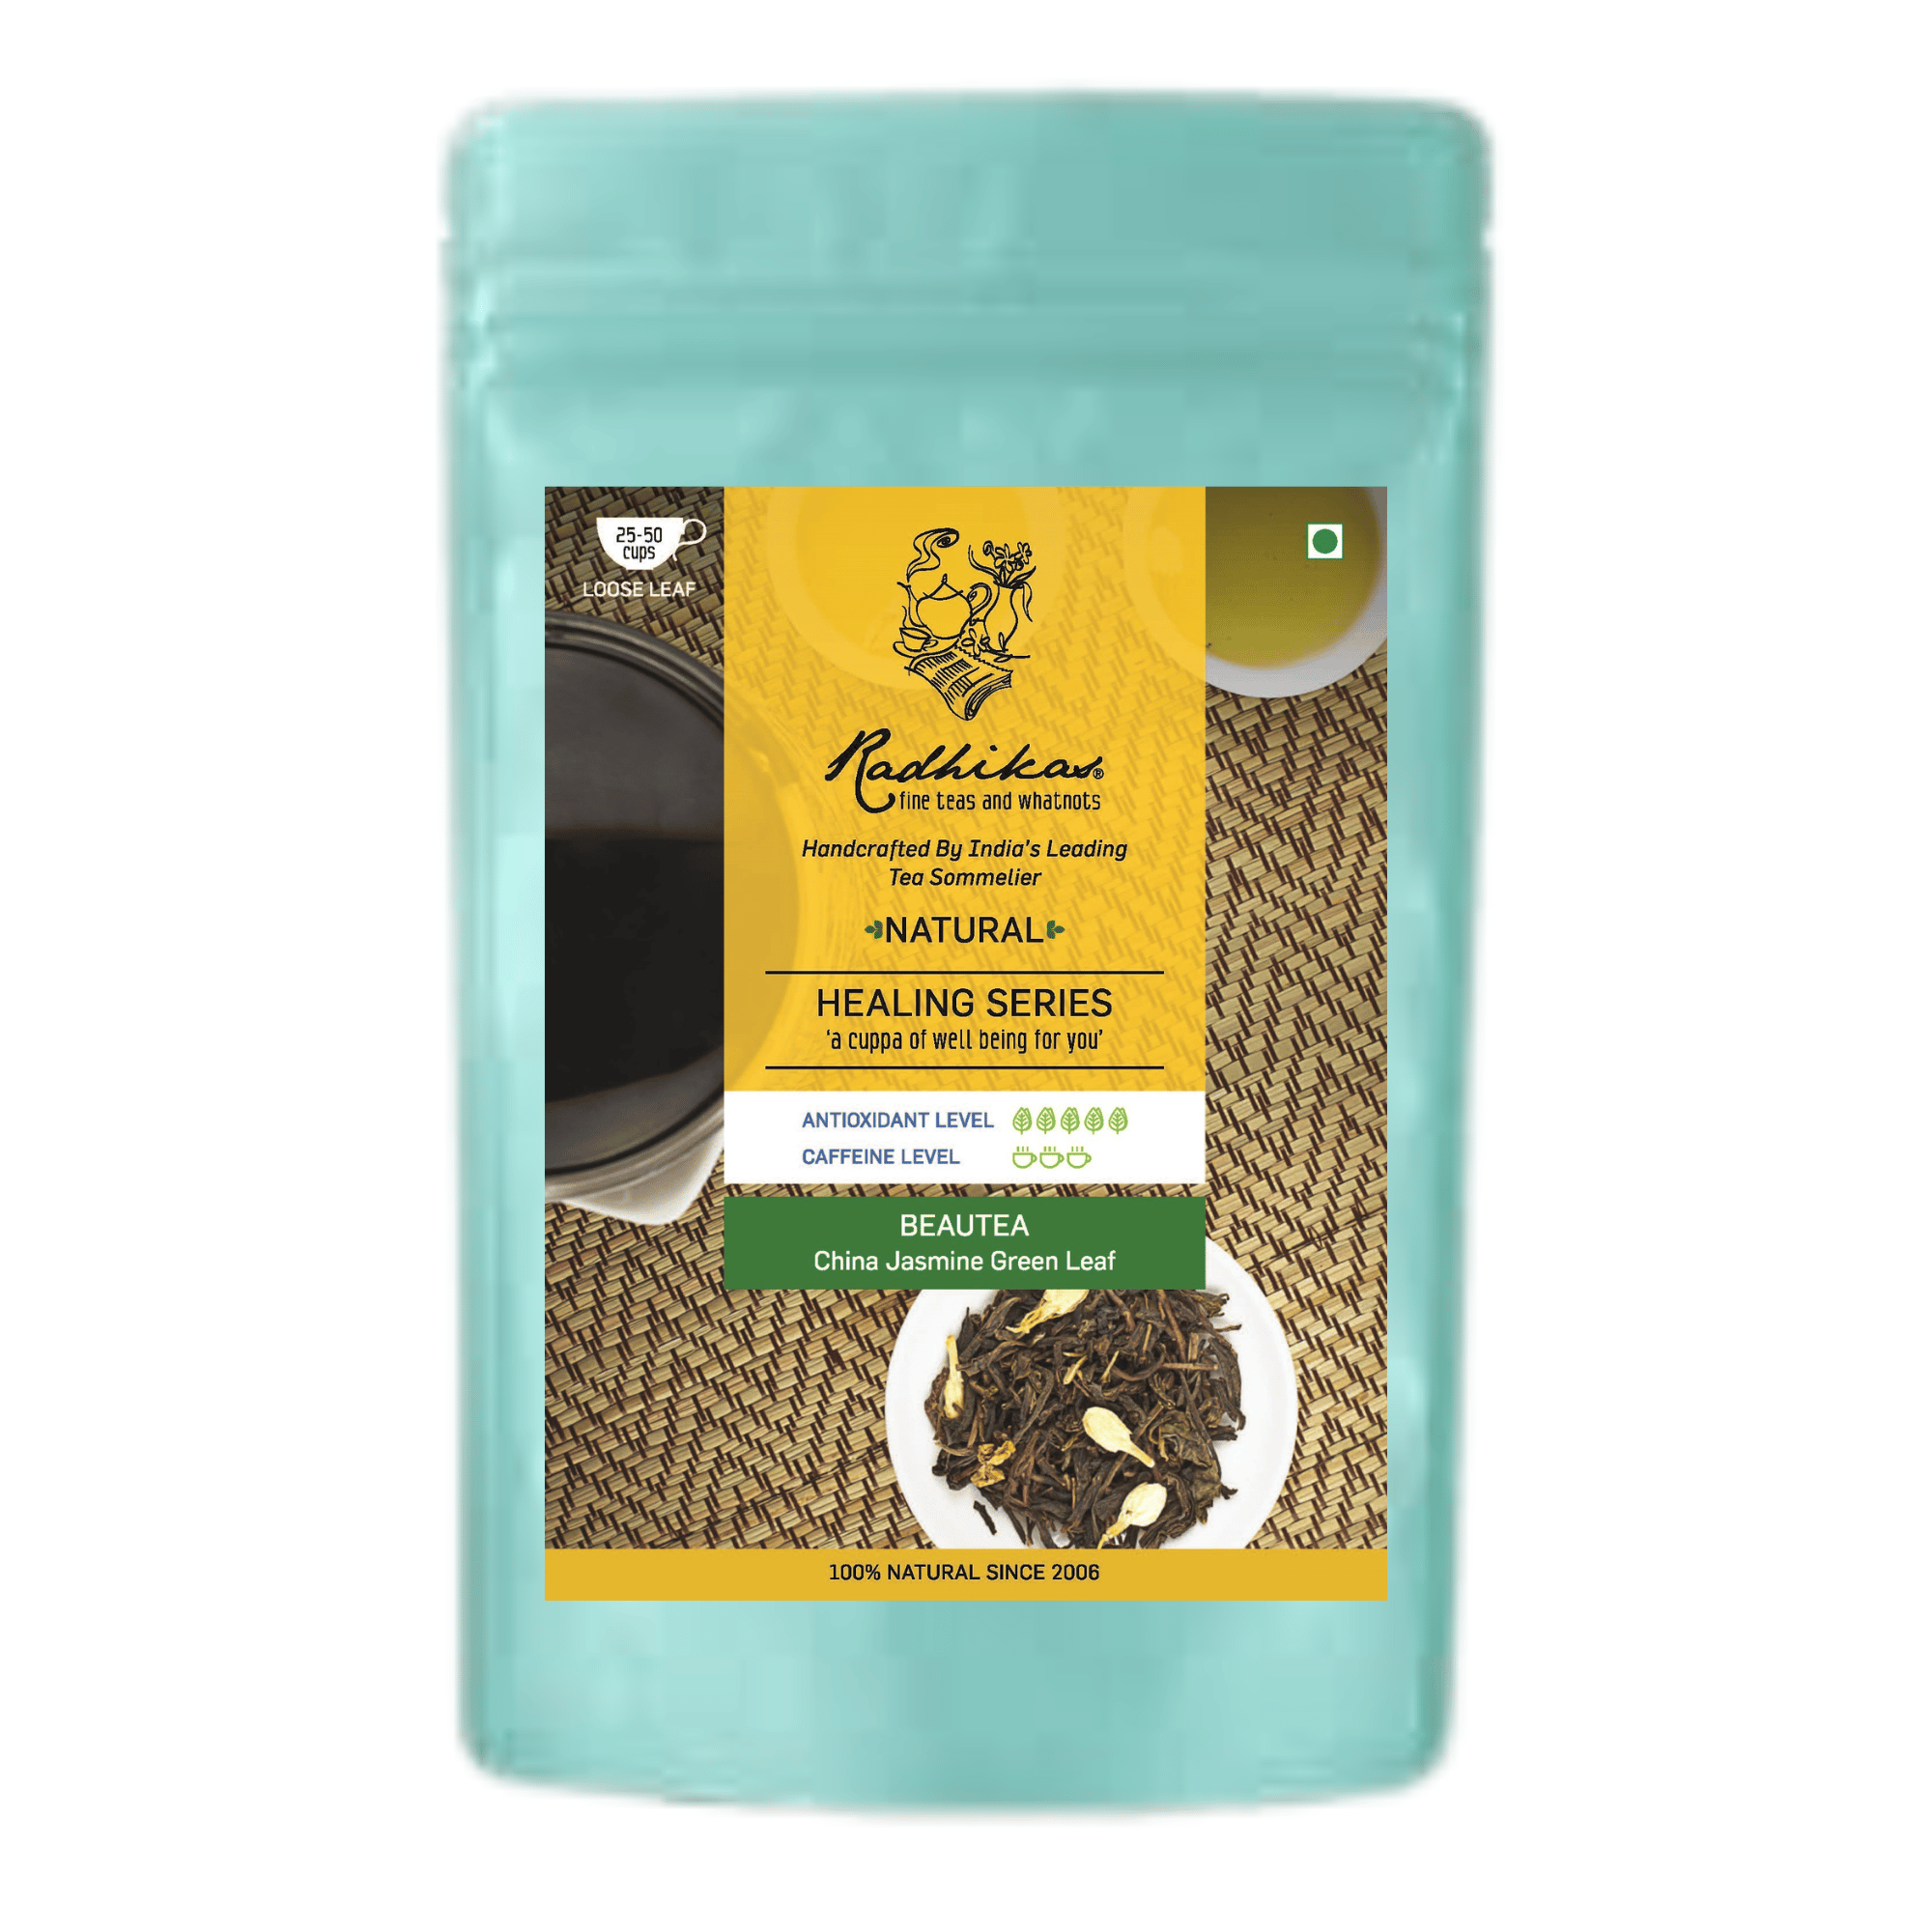 Radhikas Fine Teas and Whatnots BEAUTEA China Jasmine Green Leaf - The secret to your well-being with its fragrant and nourishing qualities